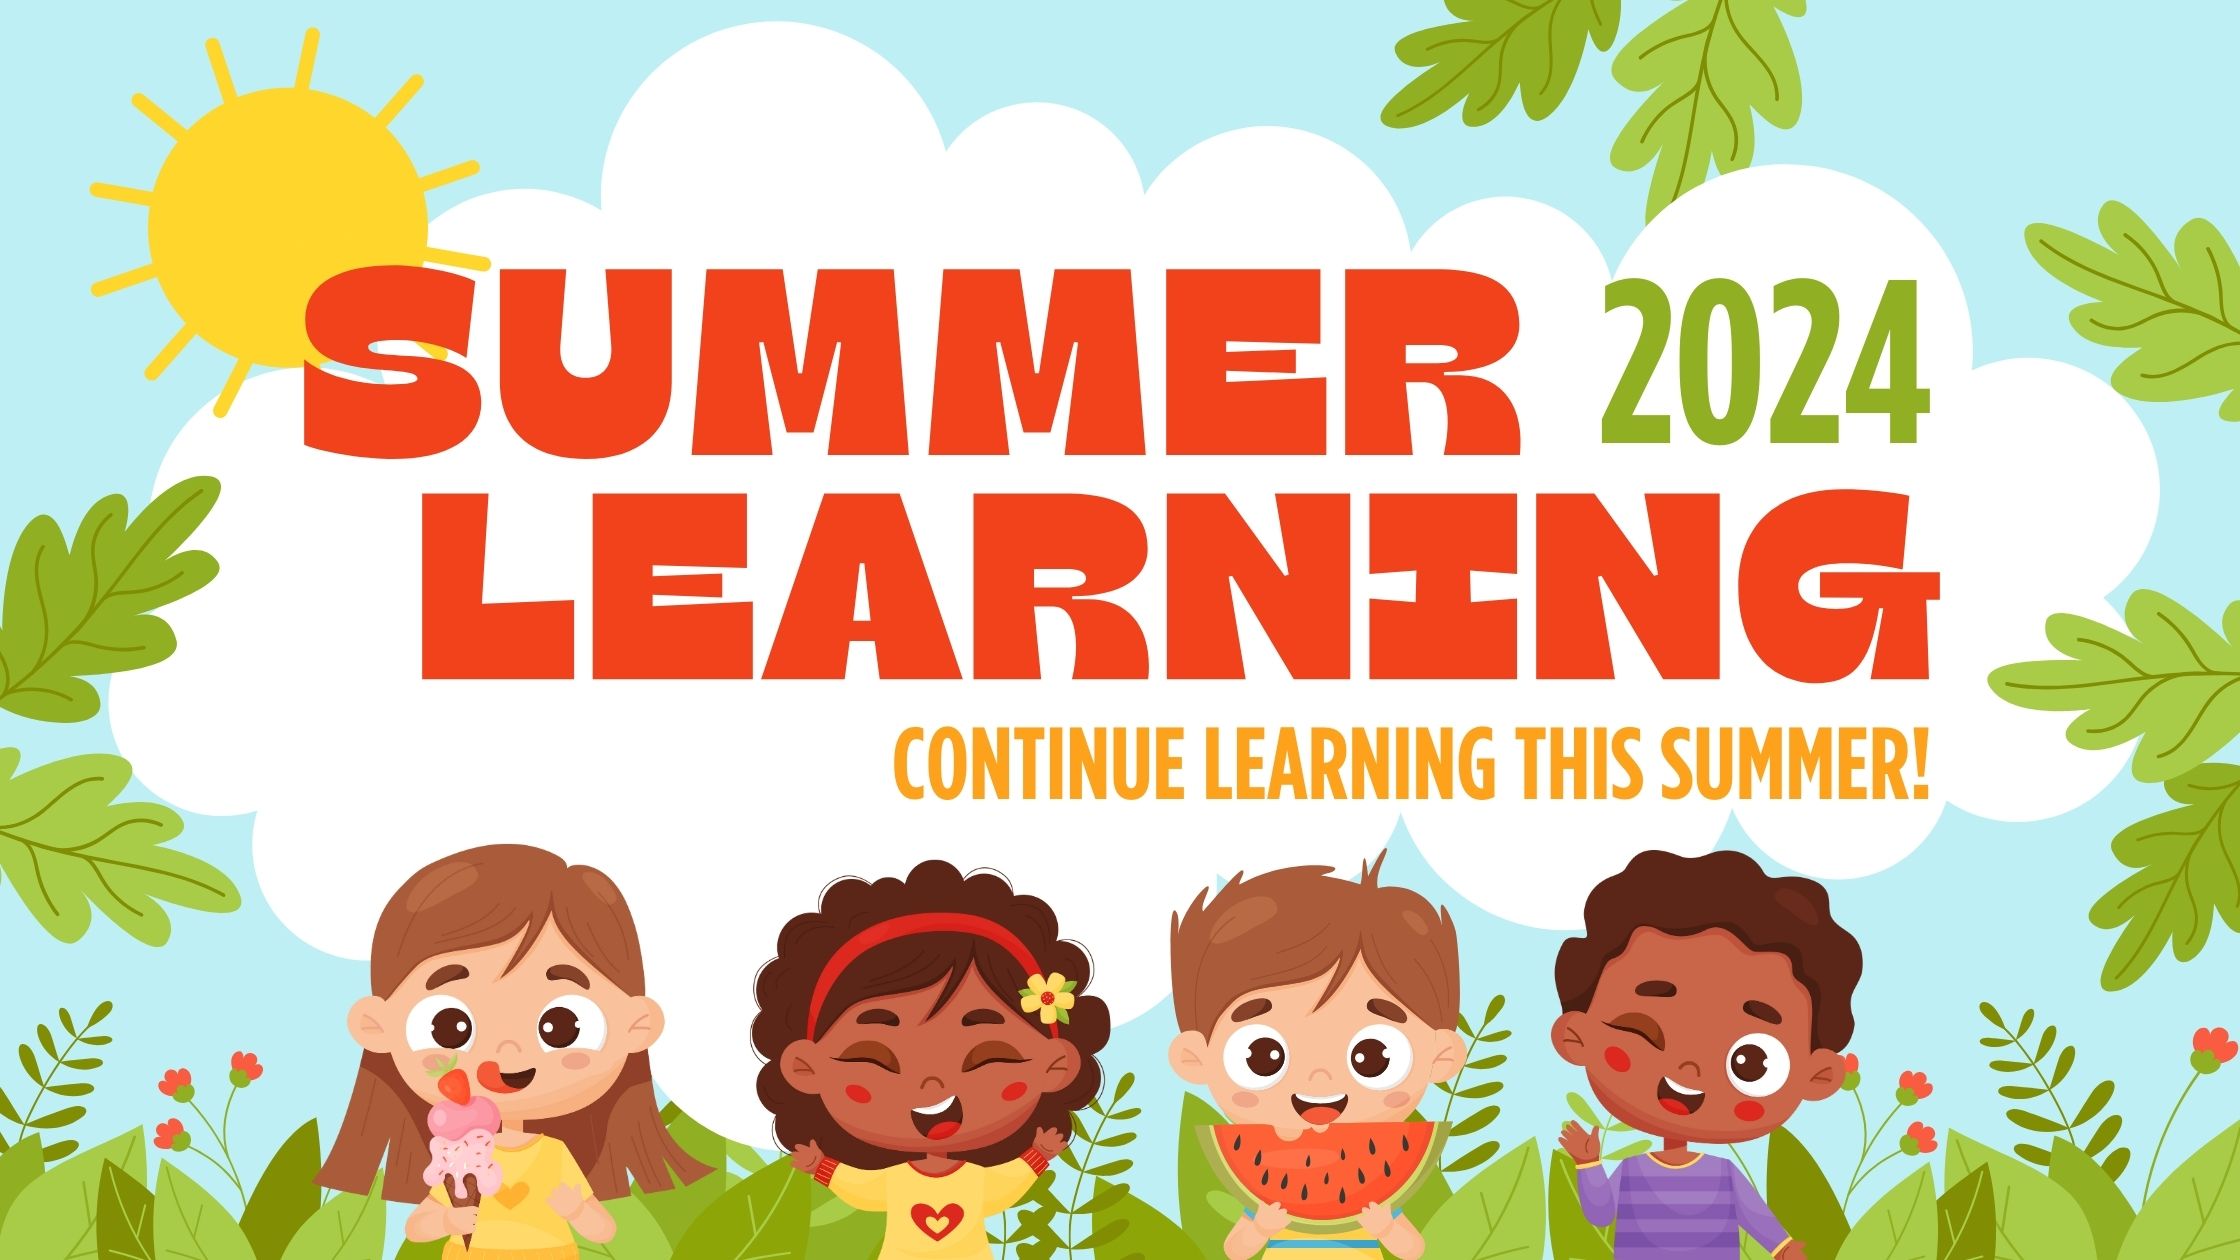 Graphic that says "Summer Learning 2024, continue learning this summer" with children doing summer activities.